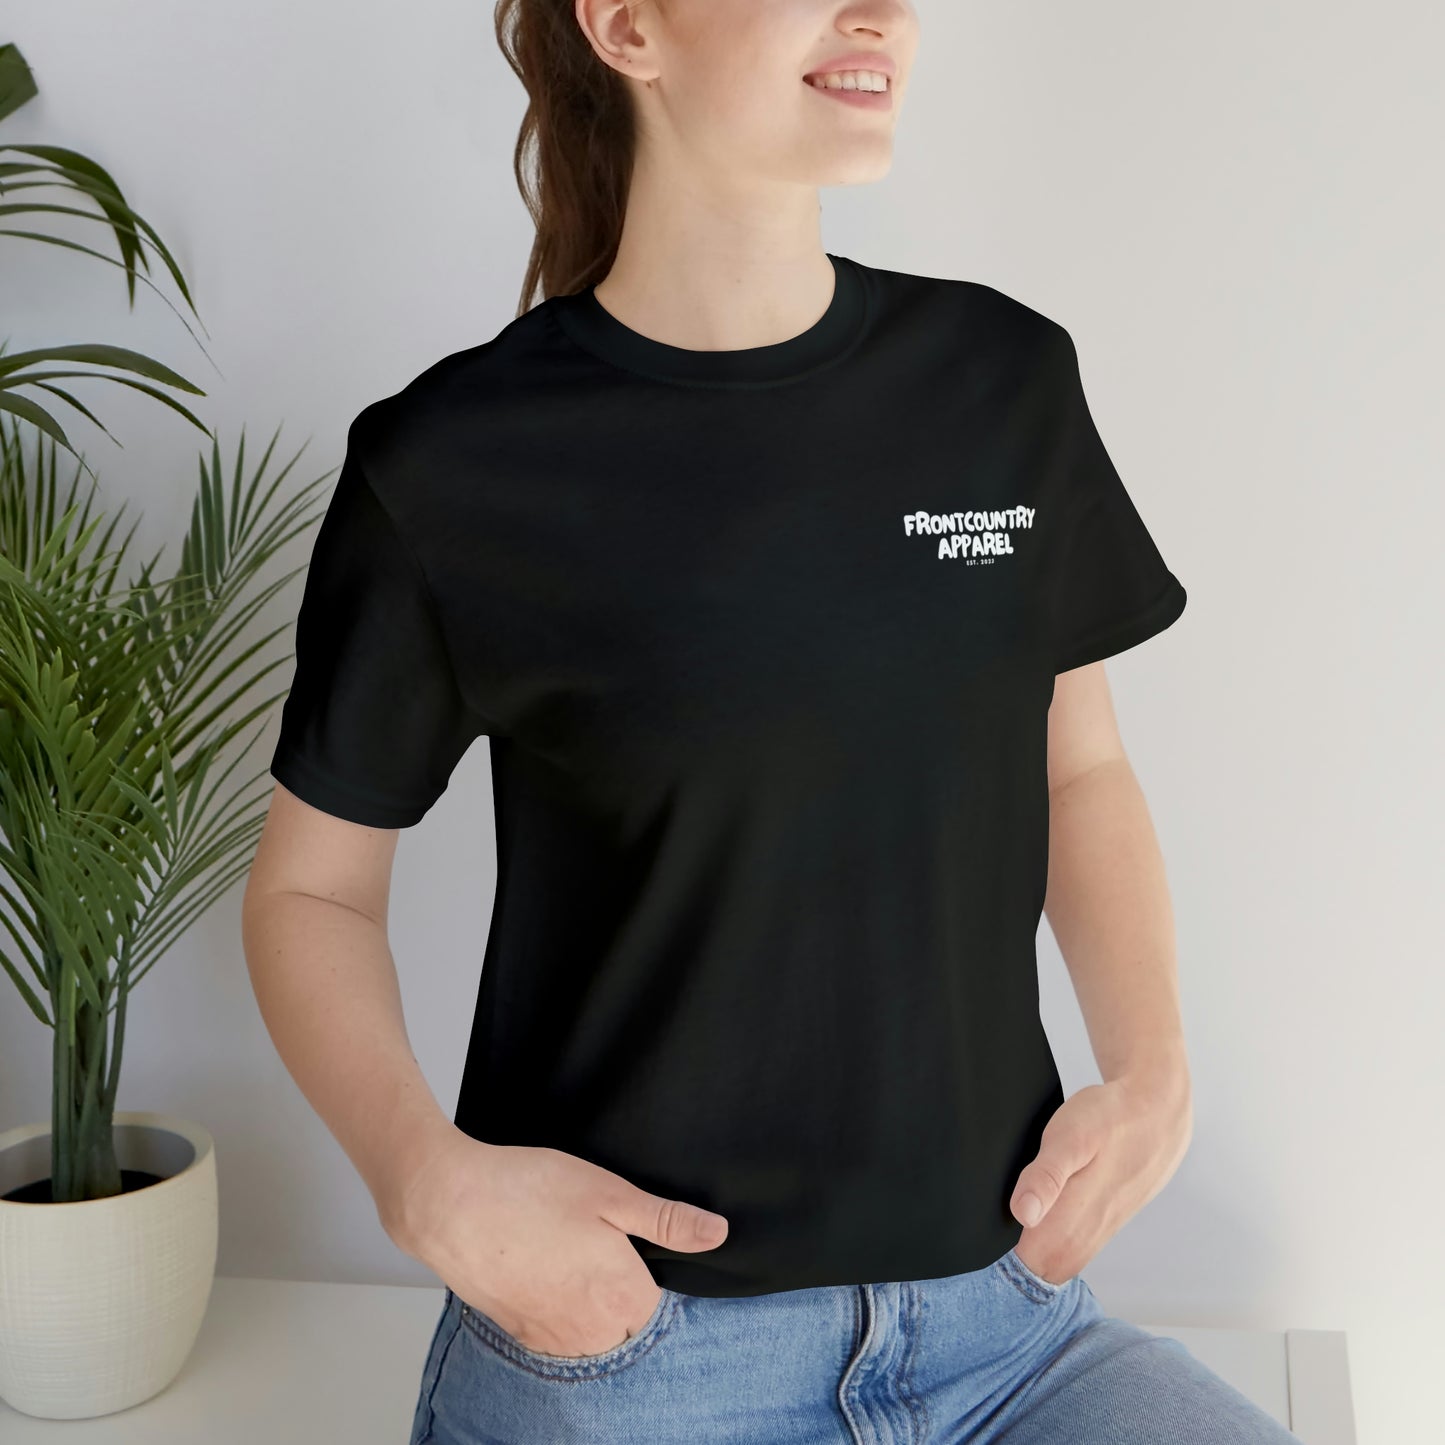 Welcome to the Frontcountry Tee